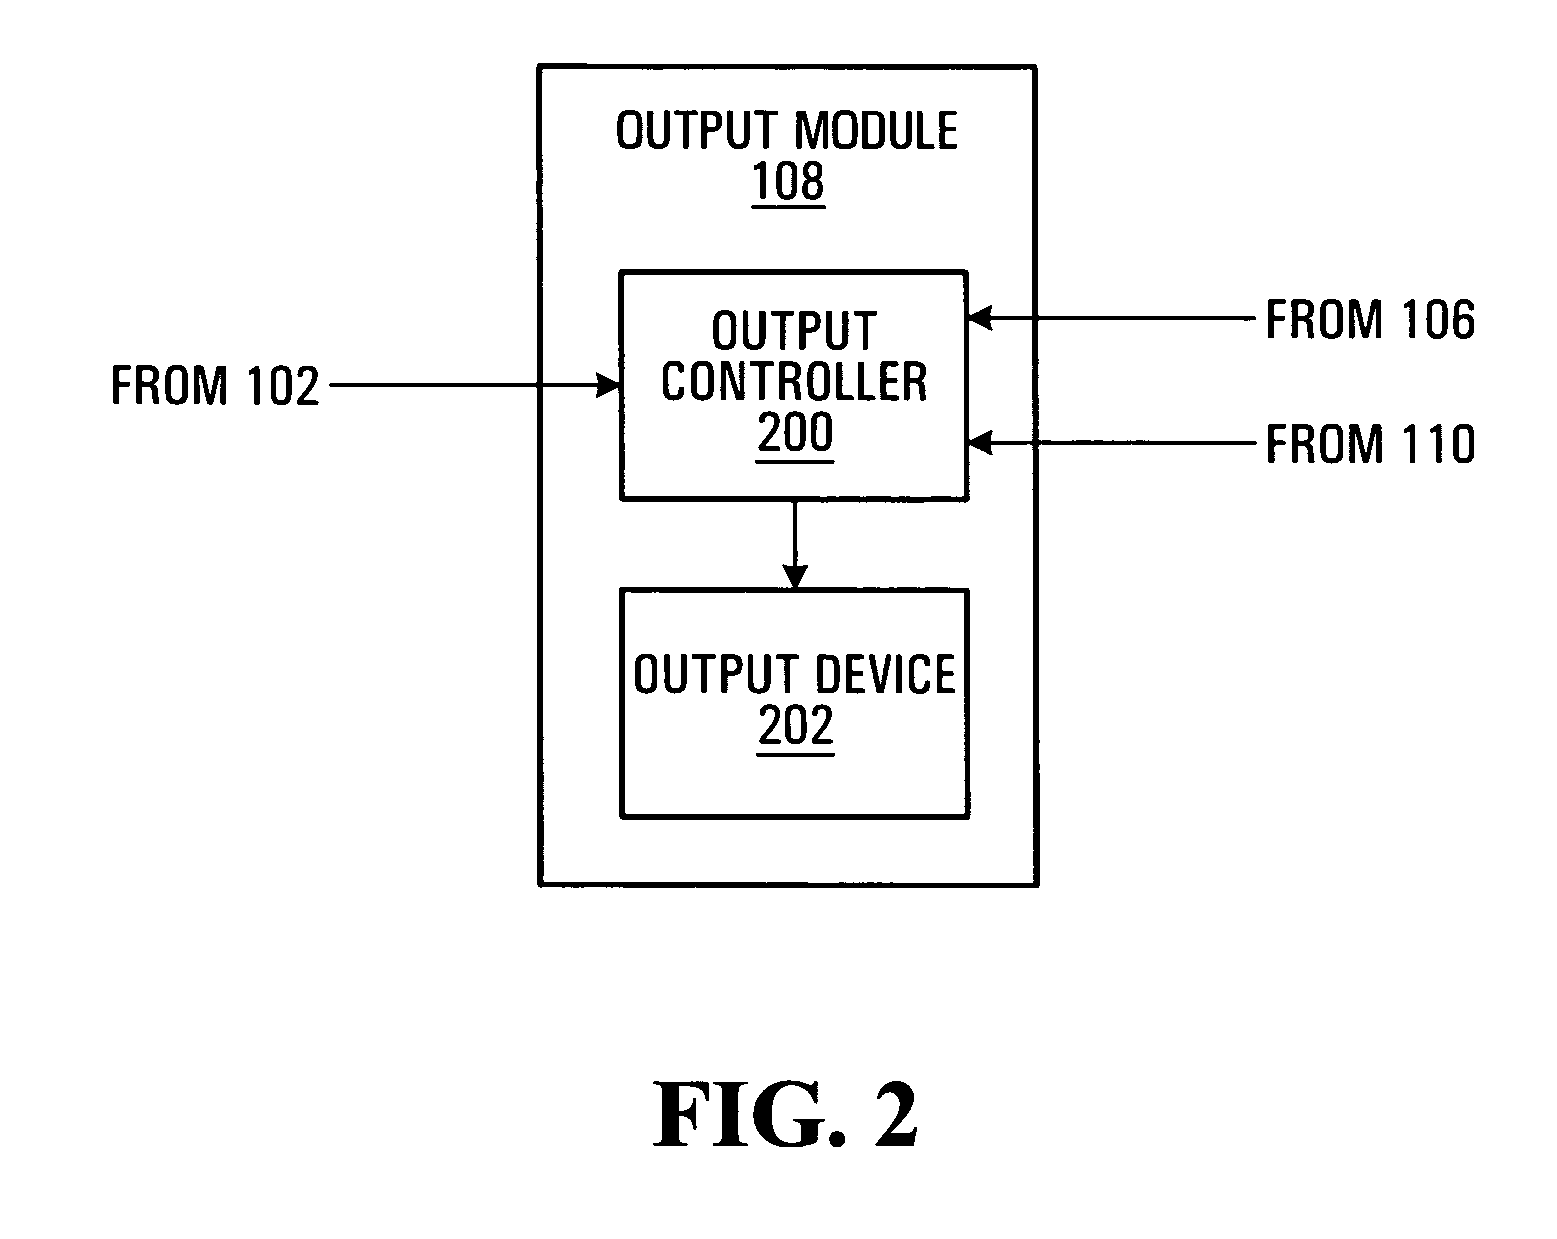 Database of target objects suitable for use in screening receptacles or people and method and apparatus for generating same